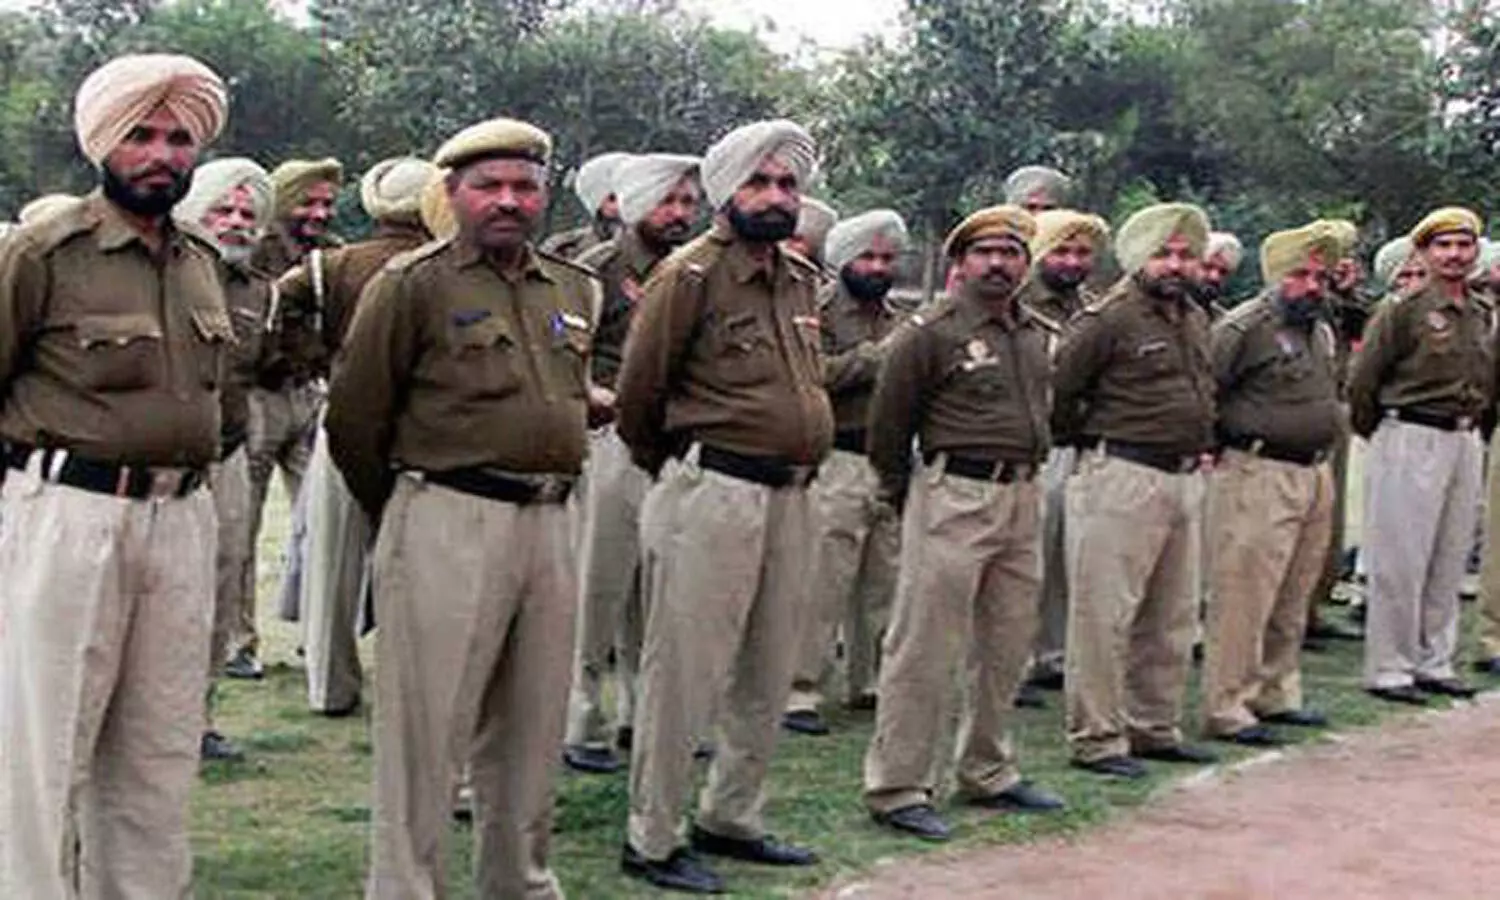 Punjab Police Recruitment 2021: Last date extended to apply for 811 Head Constable posts, check details